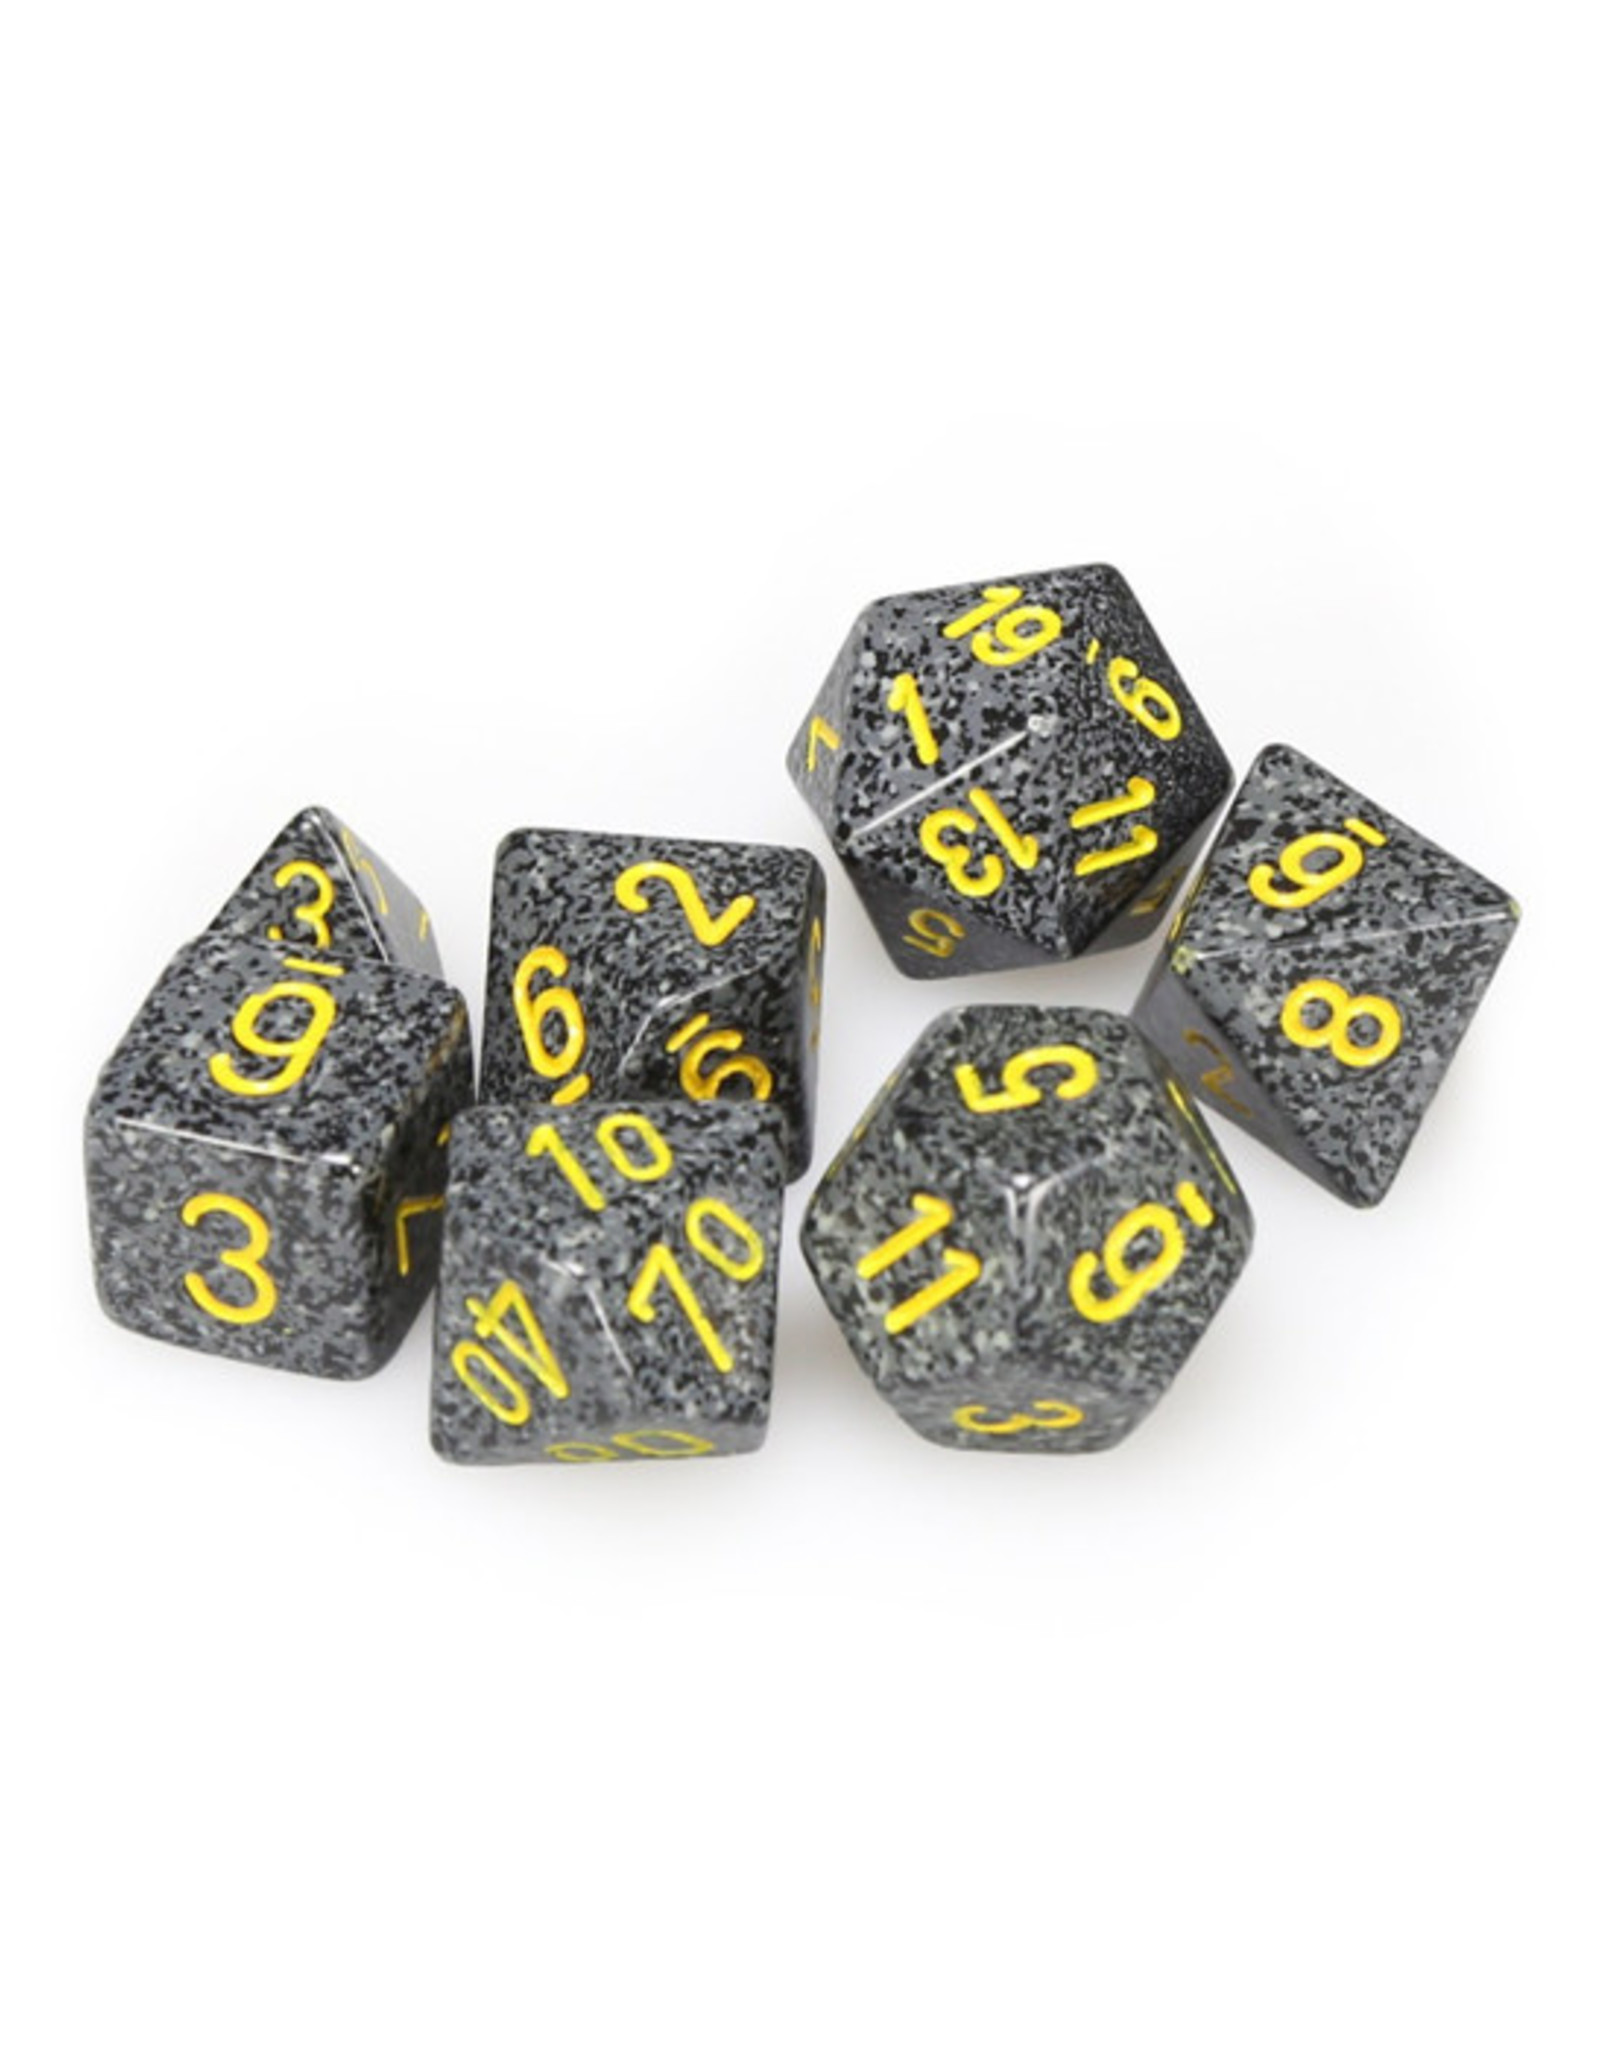 Chessex Chessex: Poly 7 Set - Speckled - Urban Camo